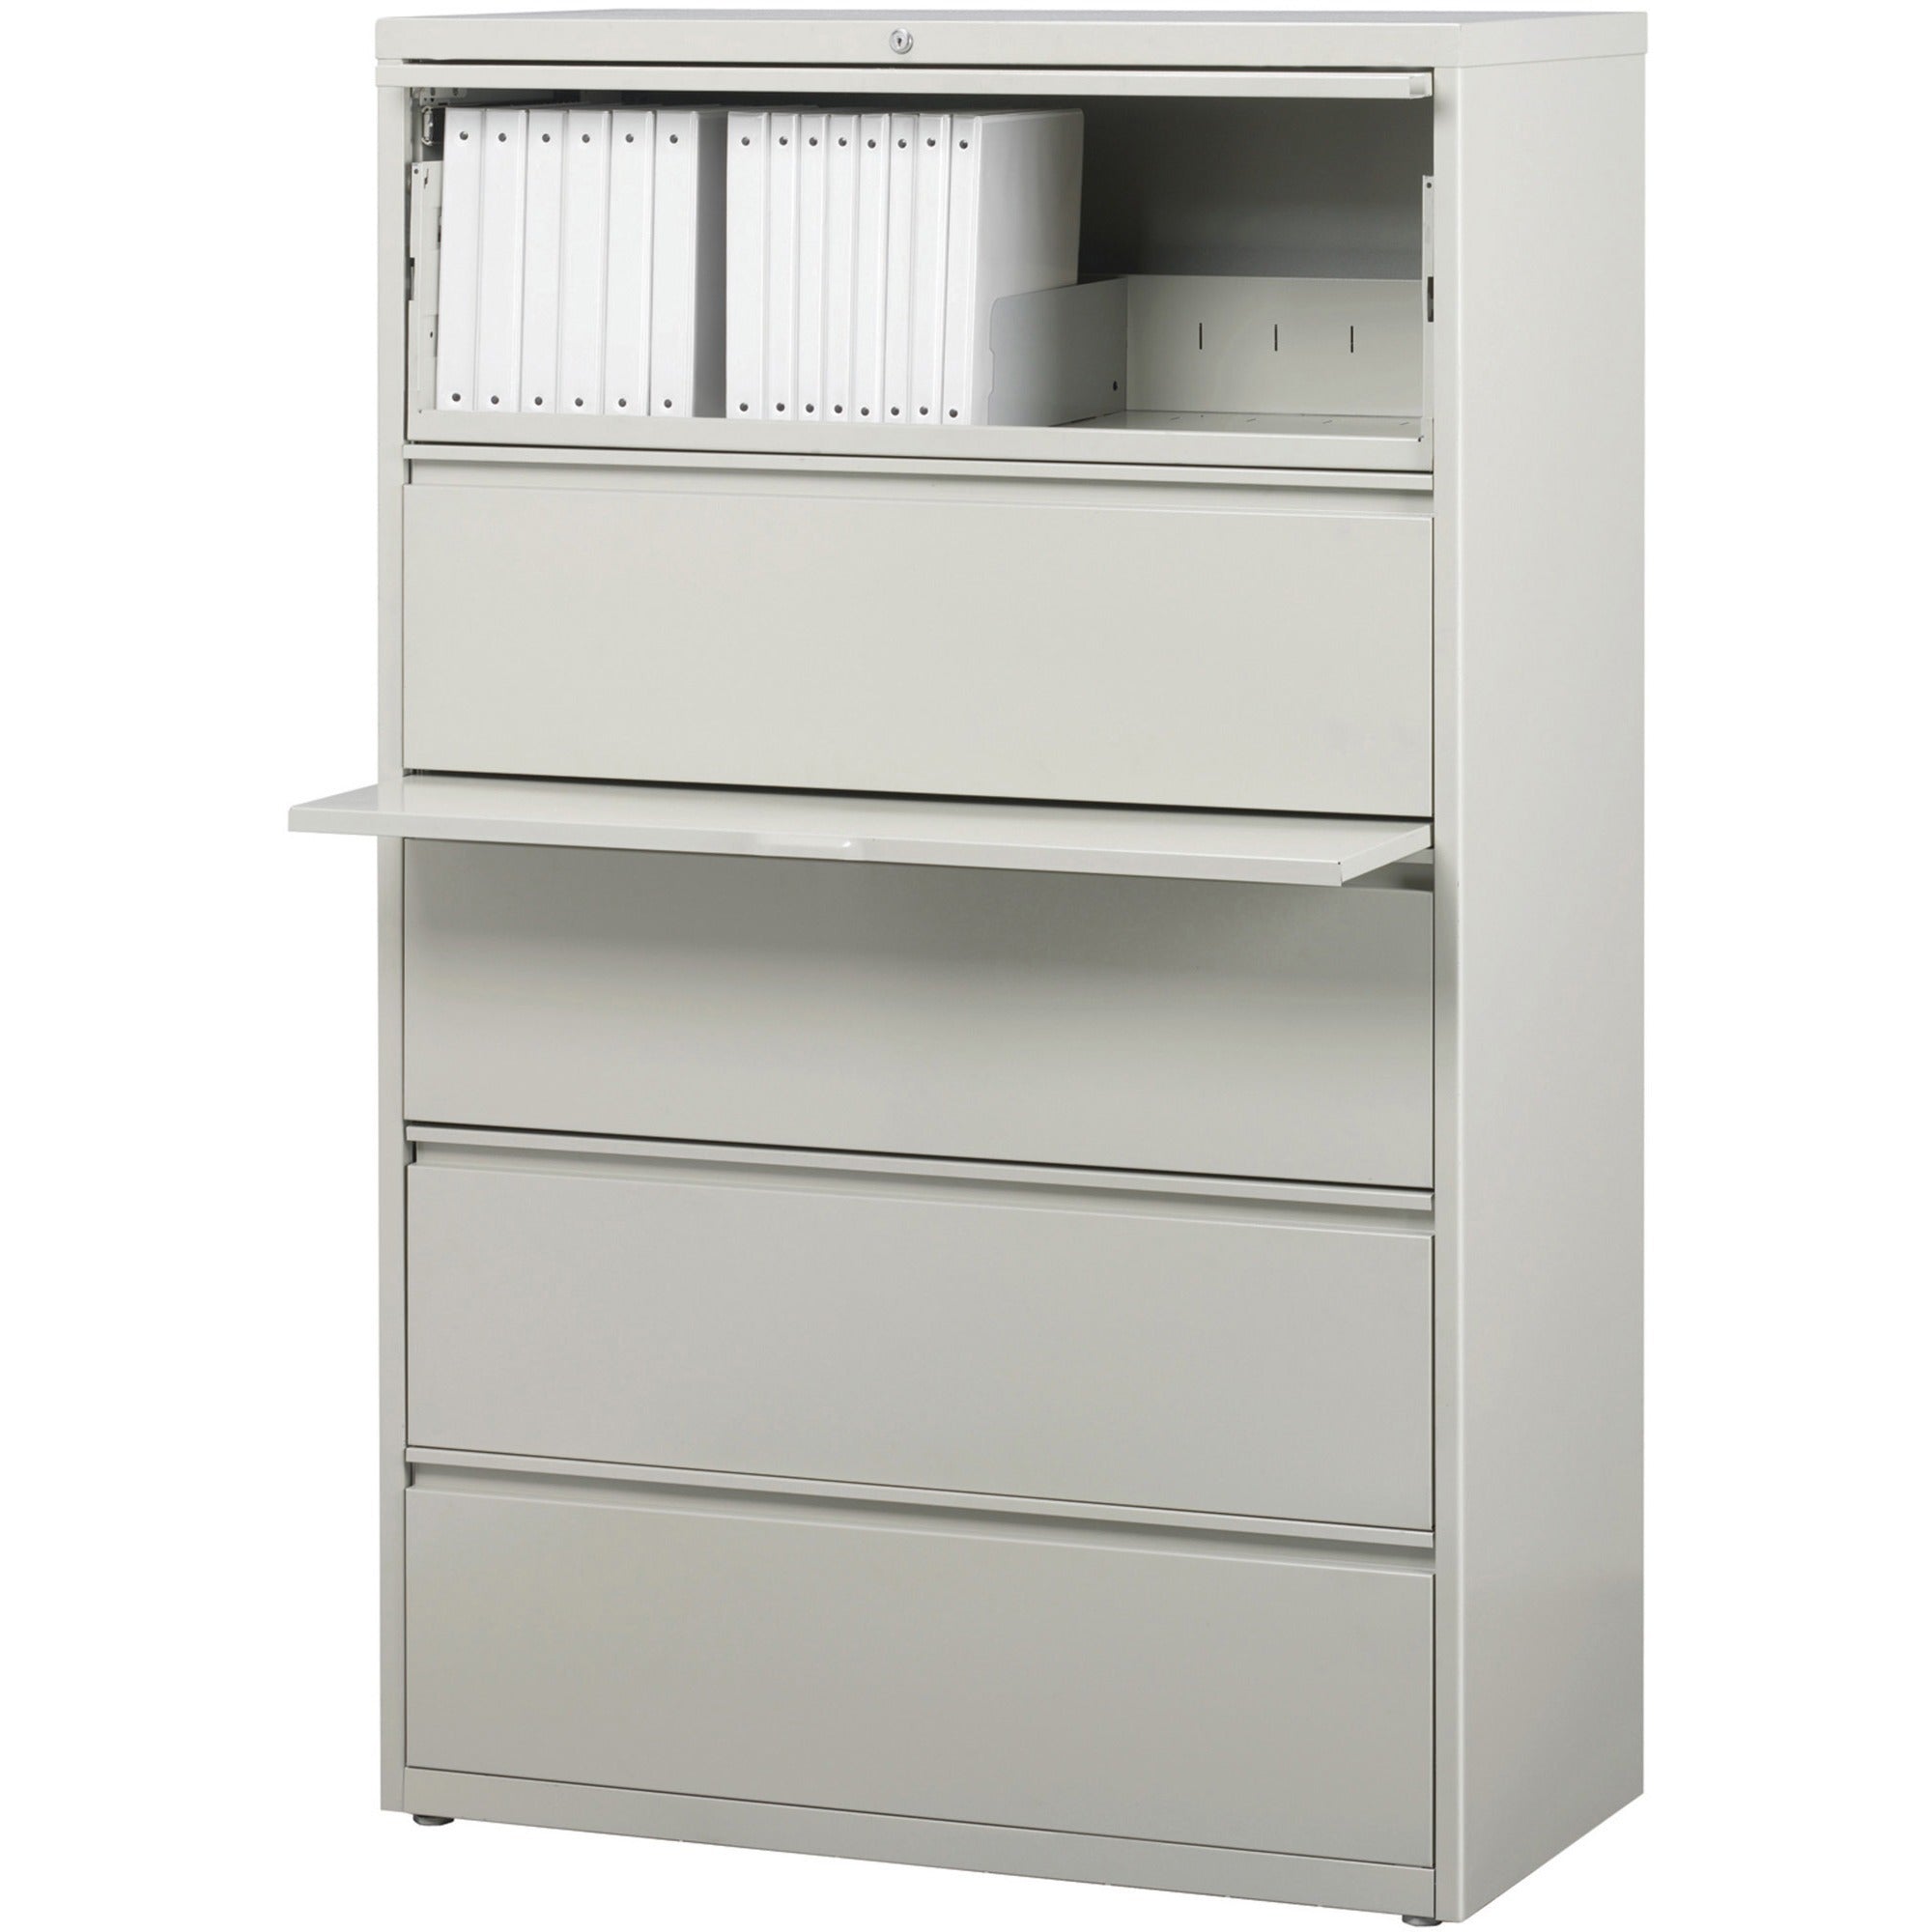 Lorell Fortress Series Lateral File w/Roll-out Posting Shelf - 36" x 18.6" x 67.7" - 5 x Drawer(s) for File - Legal, Letter, A4 - Lateral - Rust Proof, Leveling Glide, Interlocking, Ball-bearing Suspension, Label Holder - Light Gray - Baked Enamel - - 